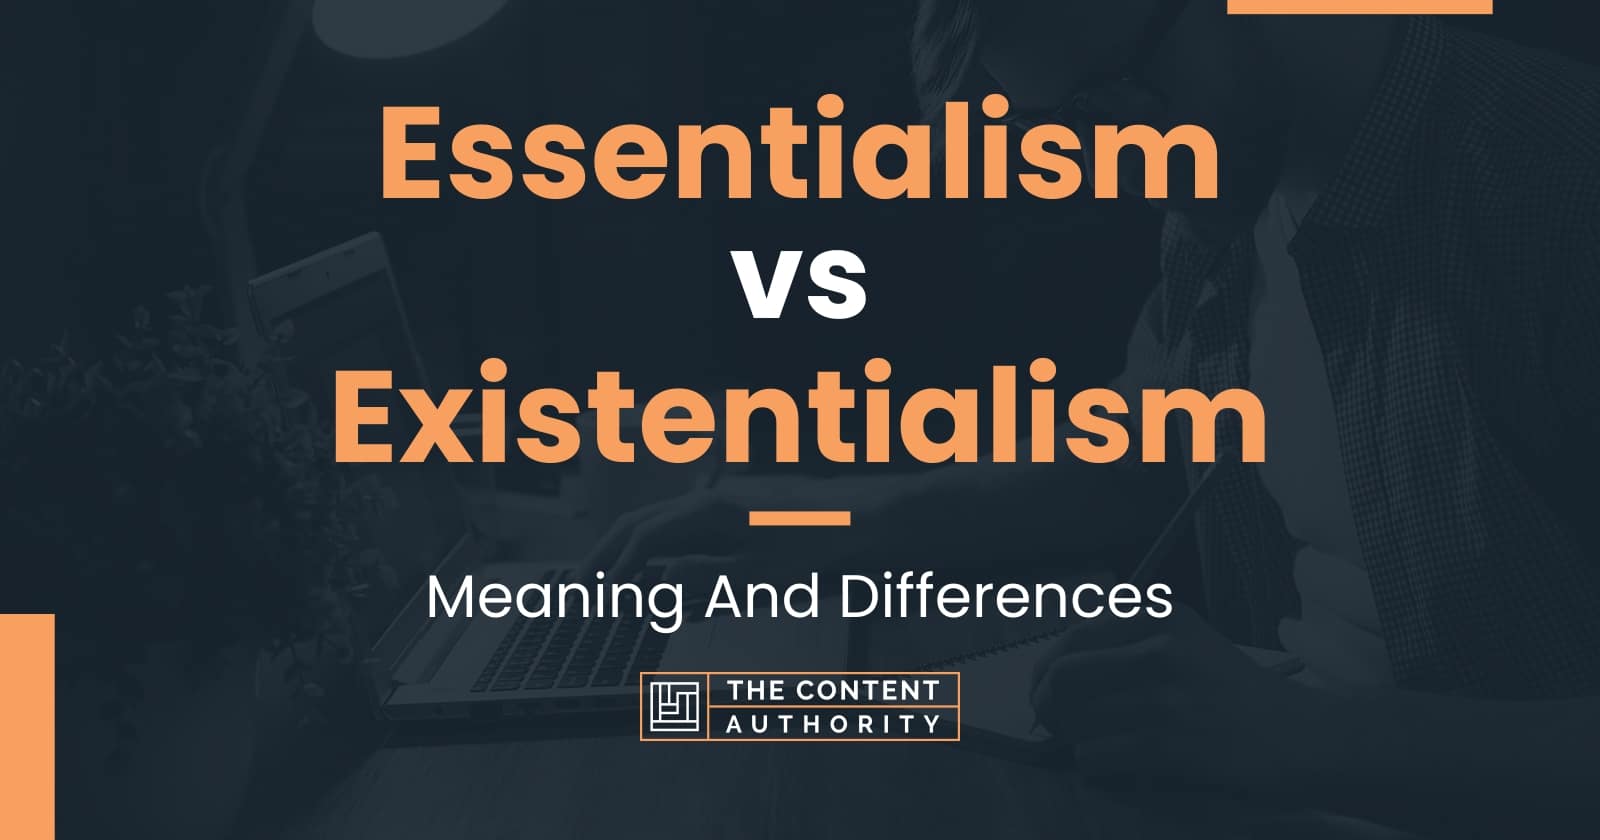 Essentialism vs Existentialism: Meaning And Differences